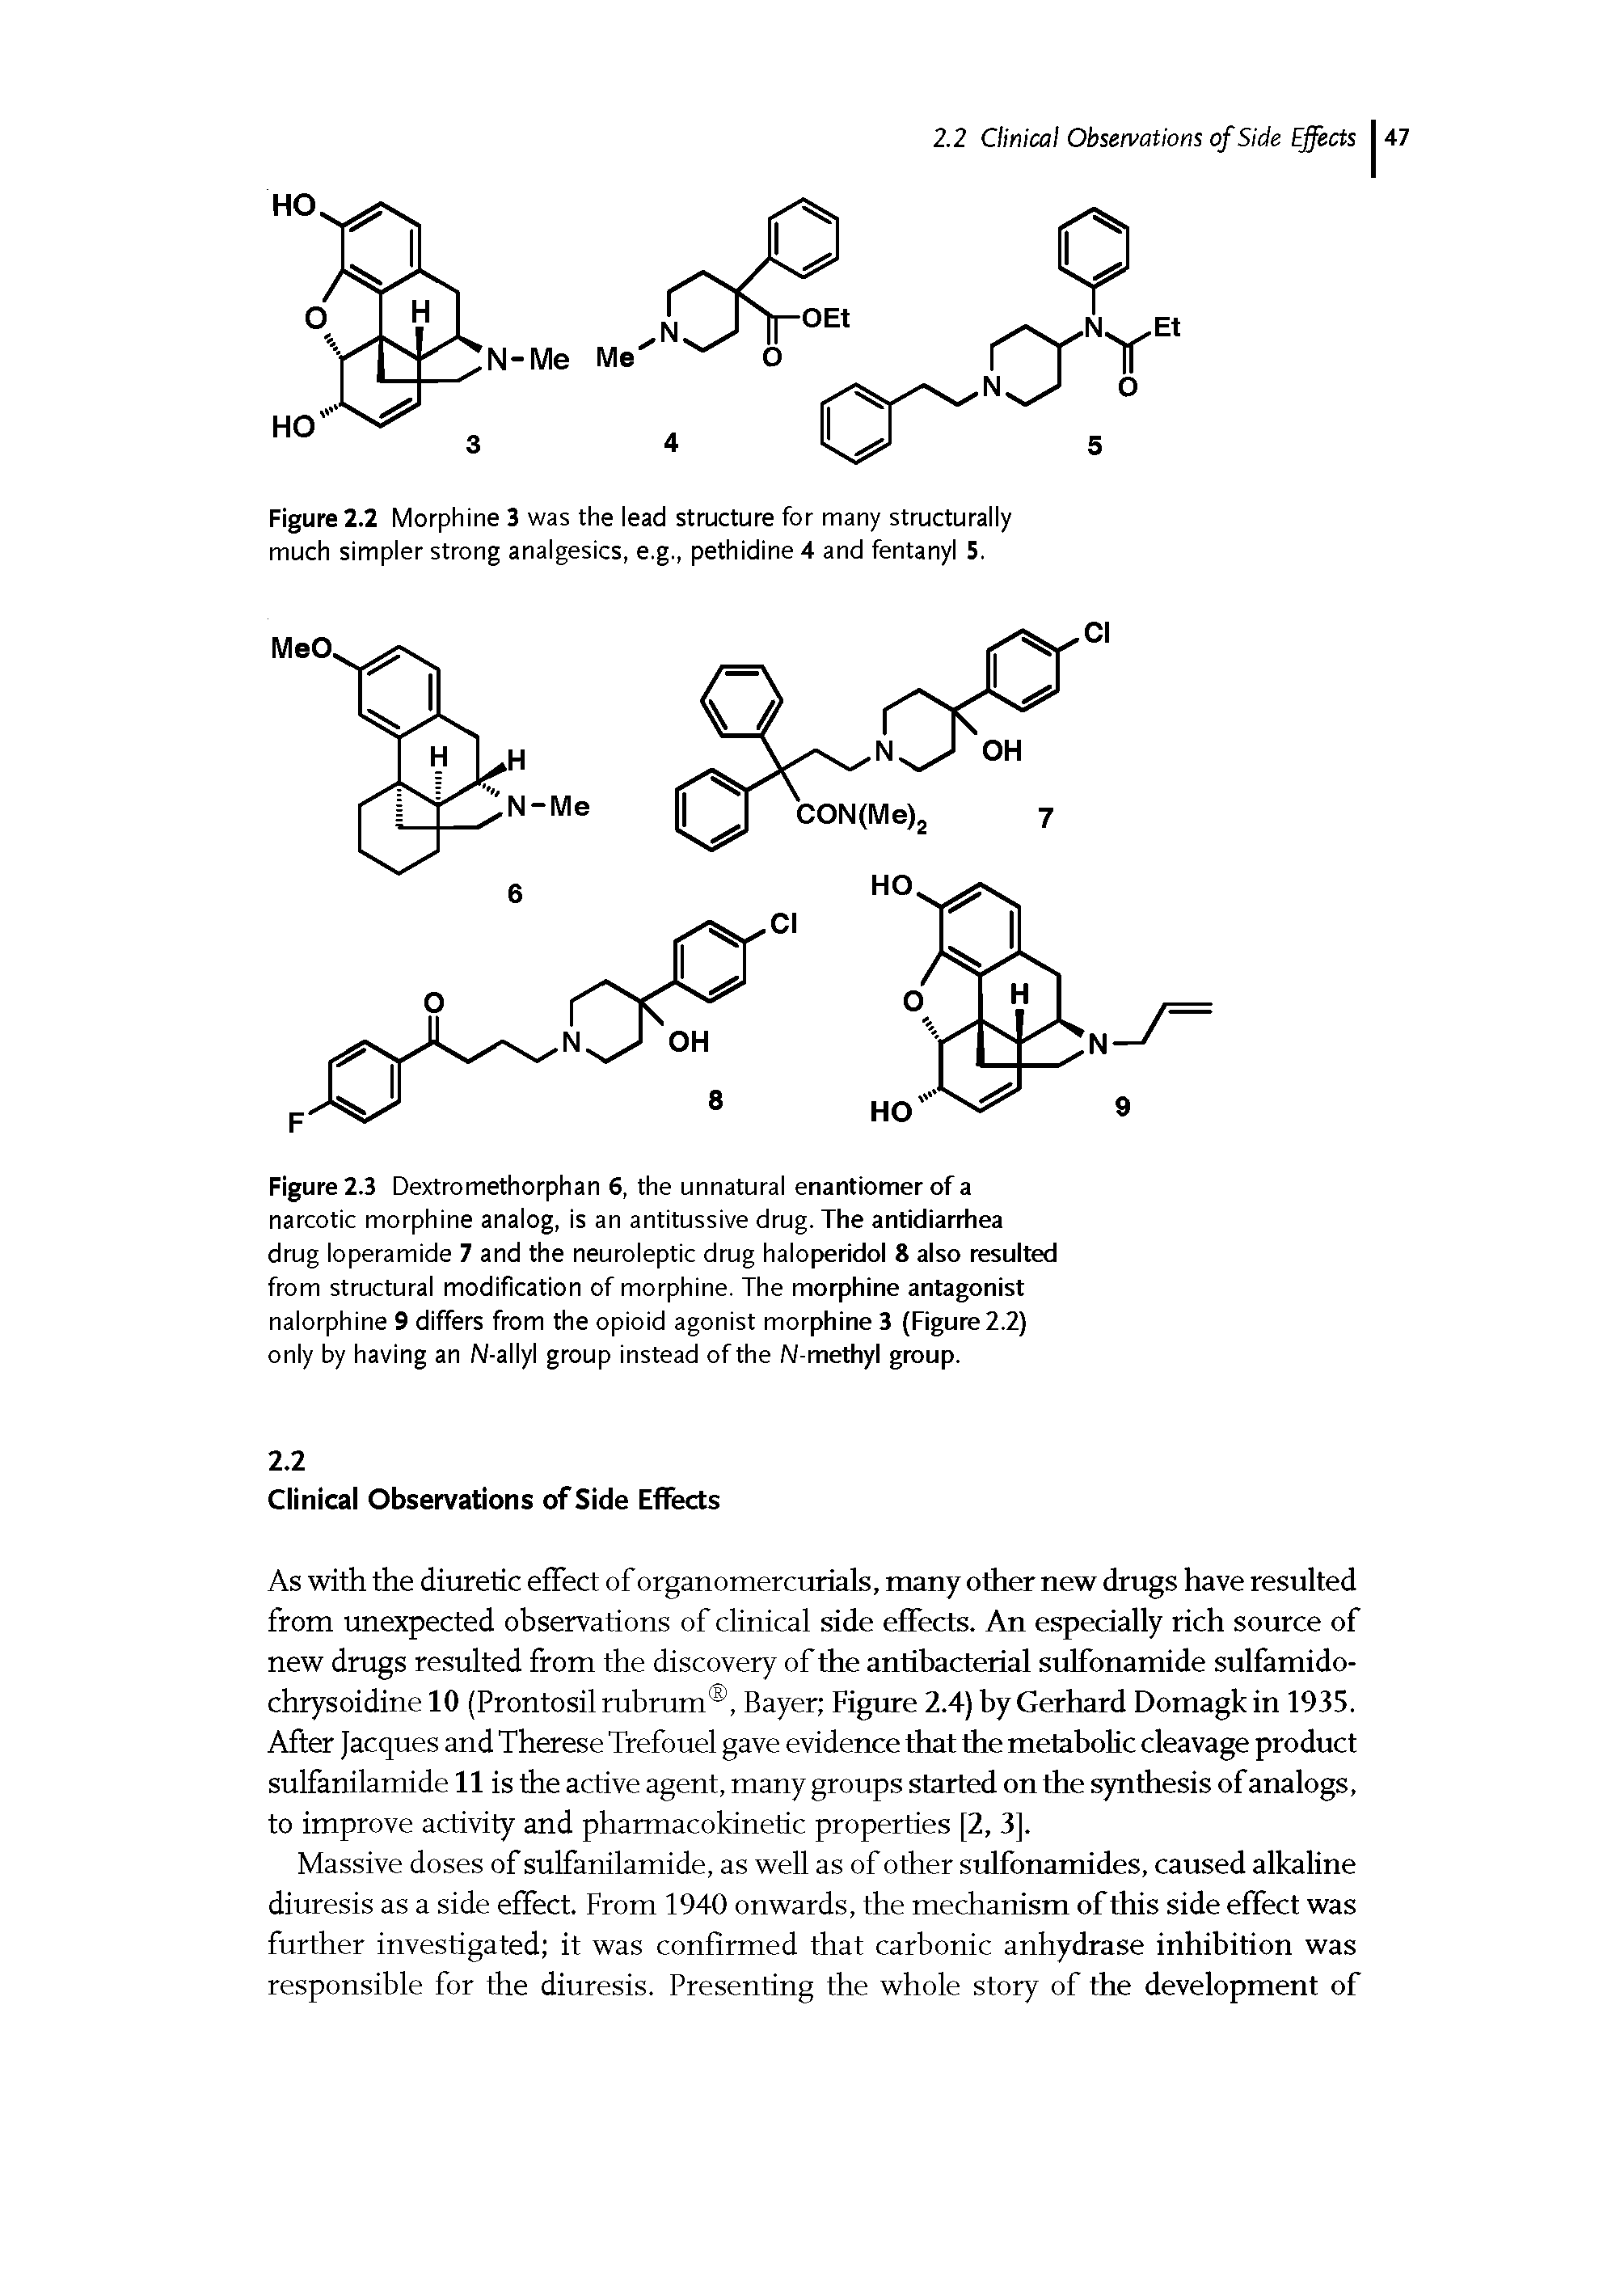 Figure 2.3 Dextromethorphan 6, the unnatural enantiomer of a narcotic morphine analog, is an antitussive drug. The antidiarrhea drug loperamide 7 and the neuroleptic drug haloperidol 8 also resulted from structural modification of morphine. The morphine antagonist nalorphine 9 differs from the opioid agonist morphine 3 (Figure 2.2) only by having an N-allyl group instead of the N-methyl group.